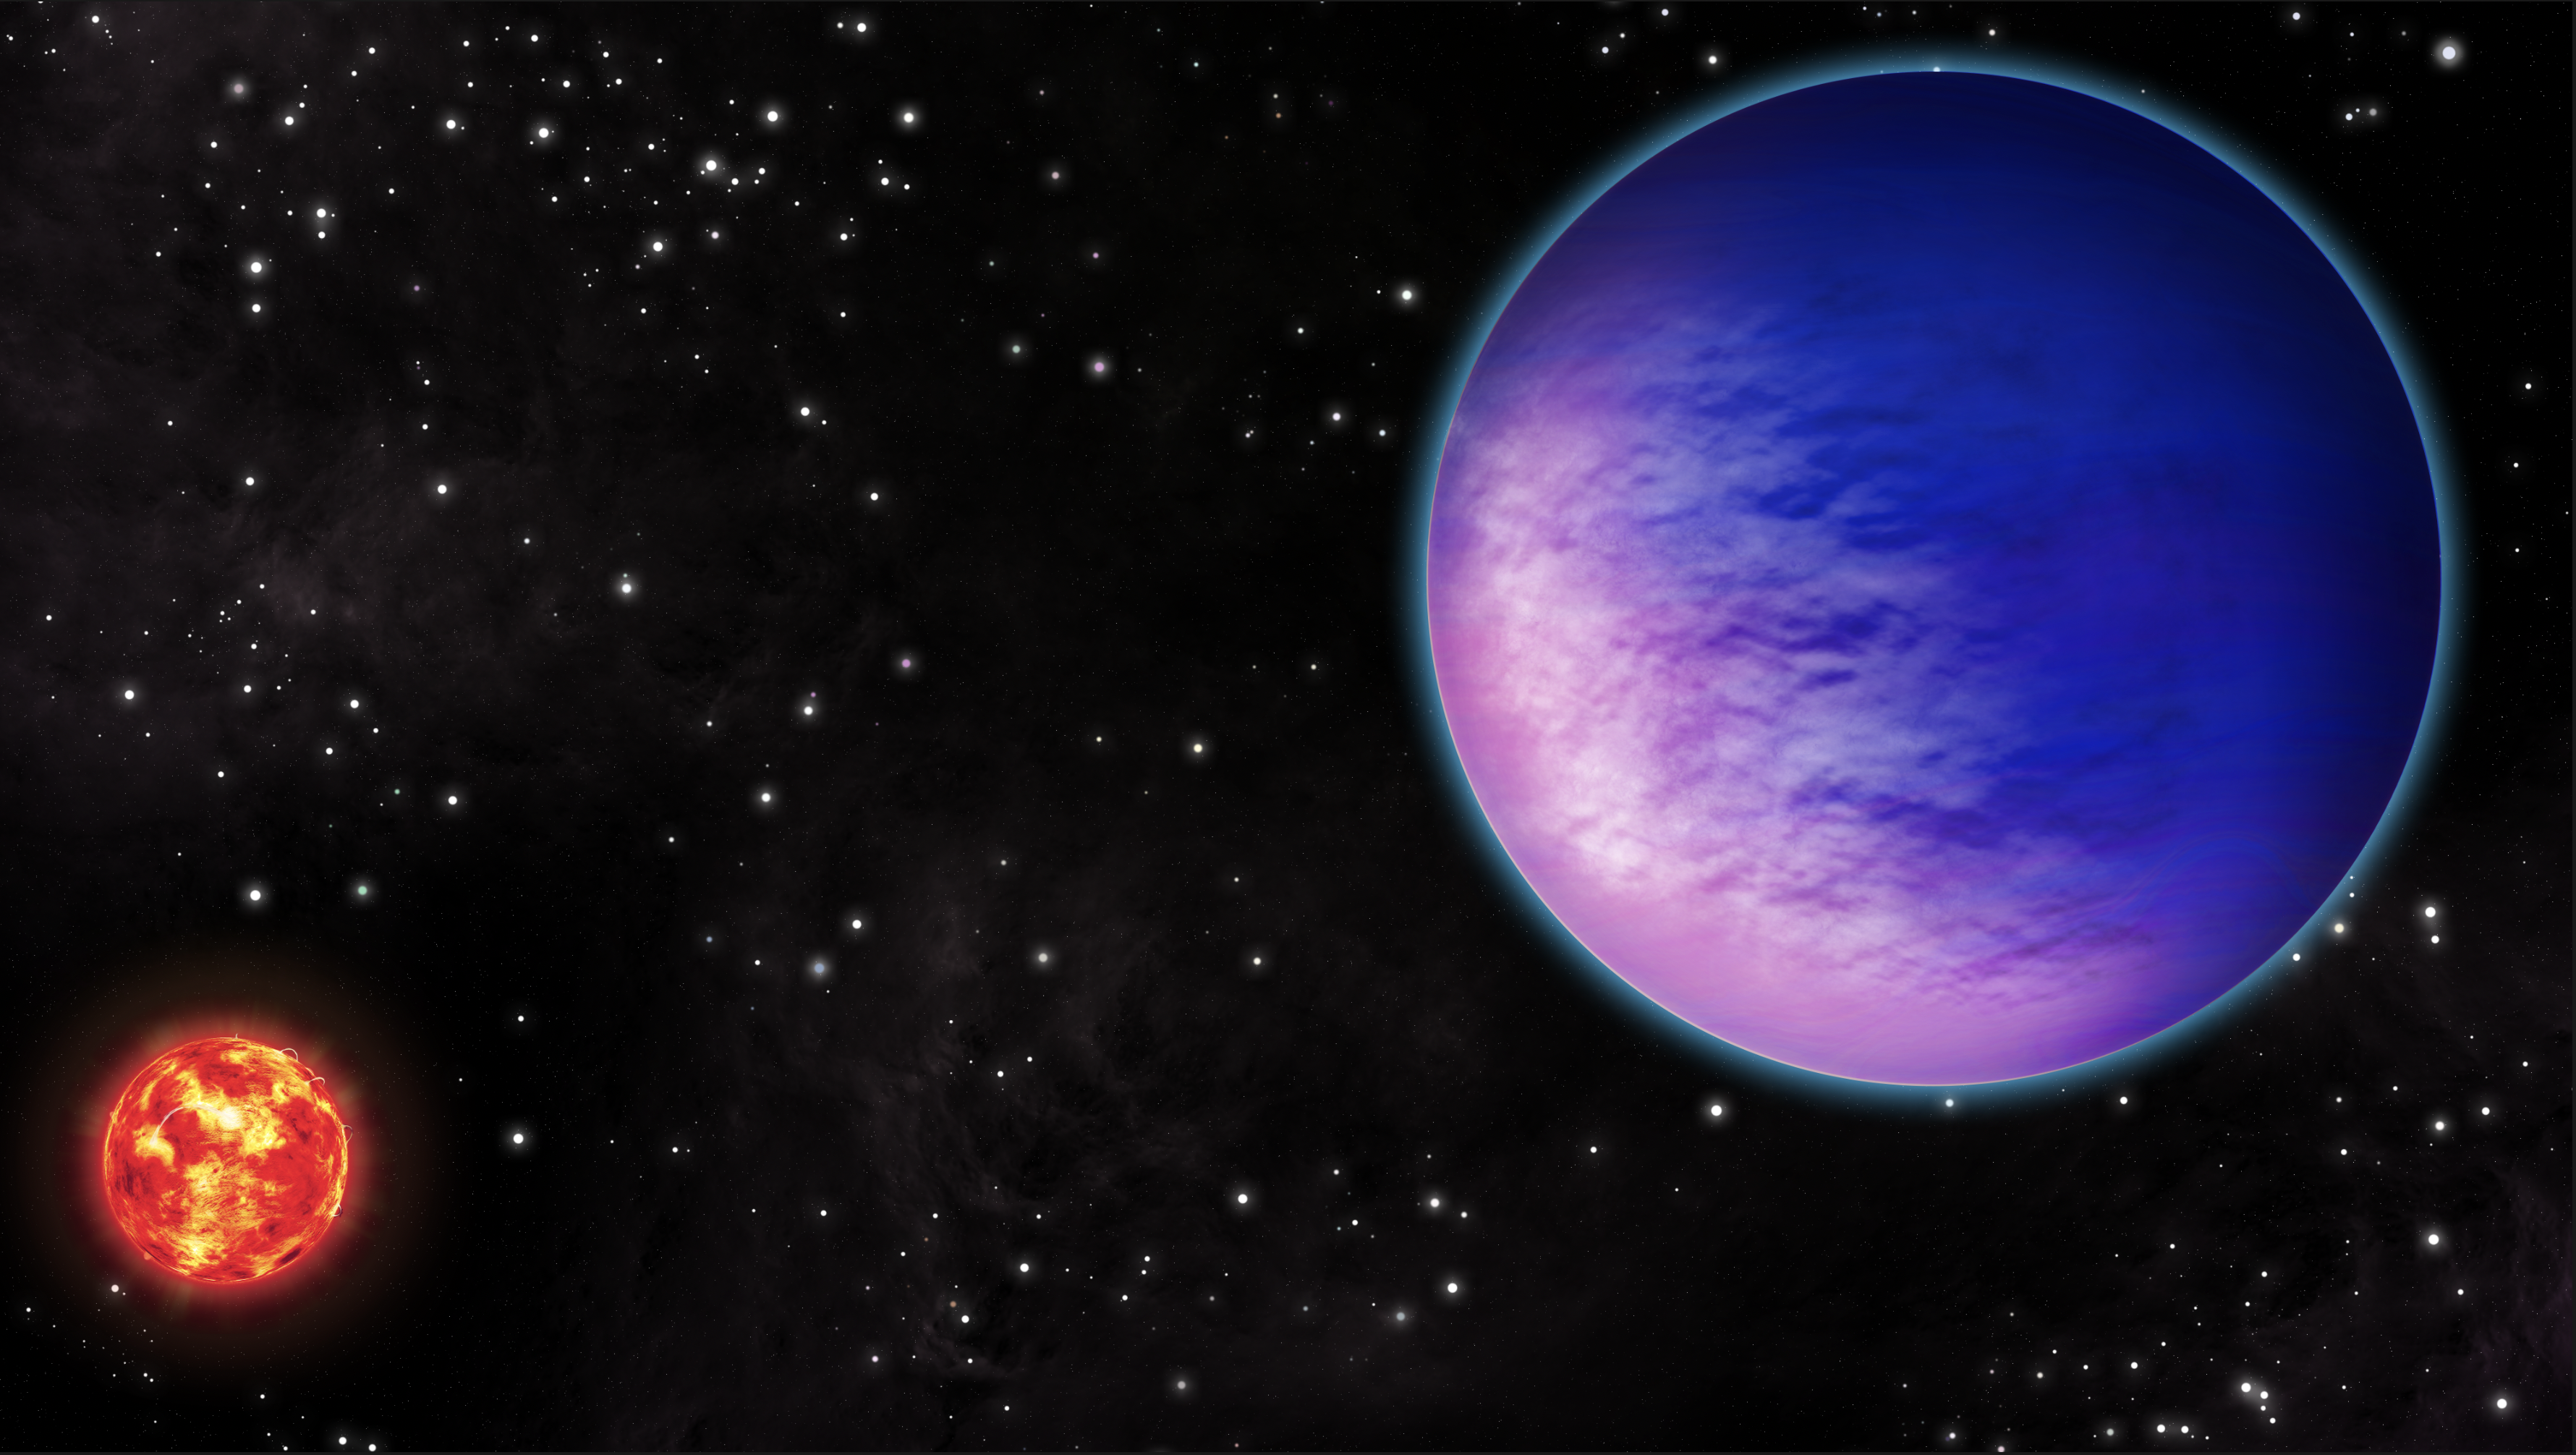 An artist's rendition of a large planet orbiting a star